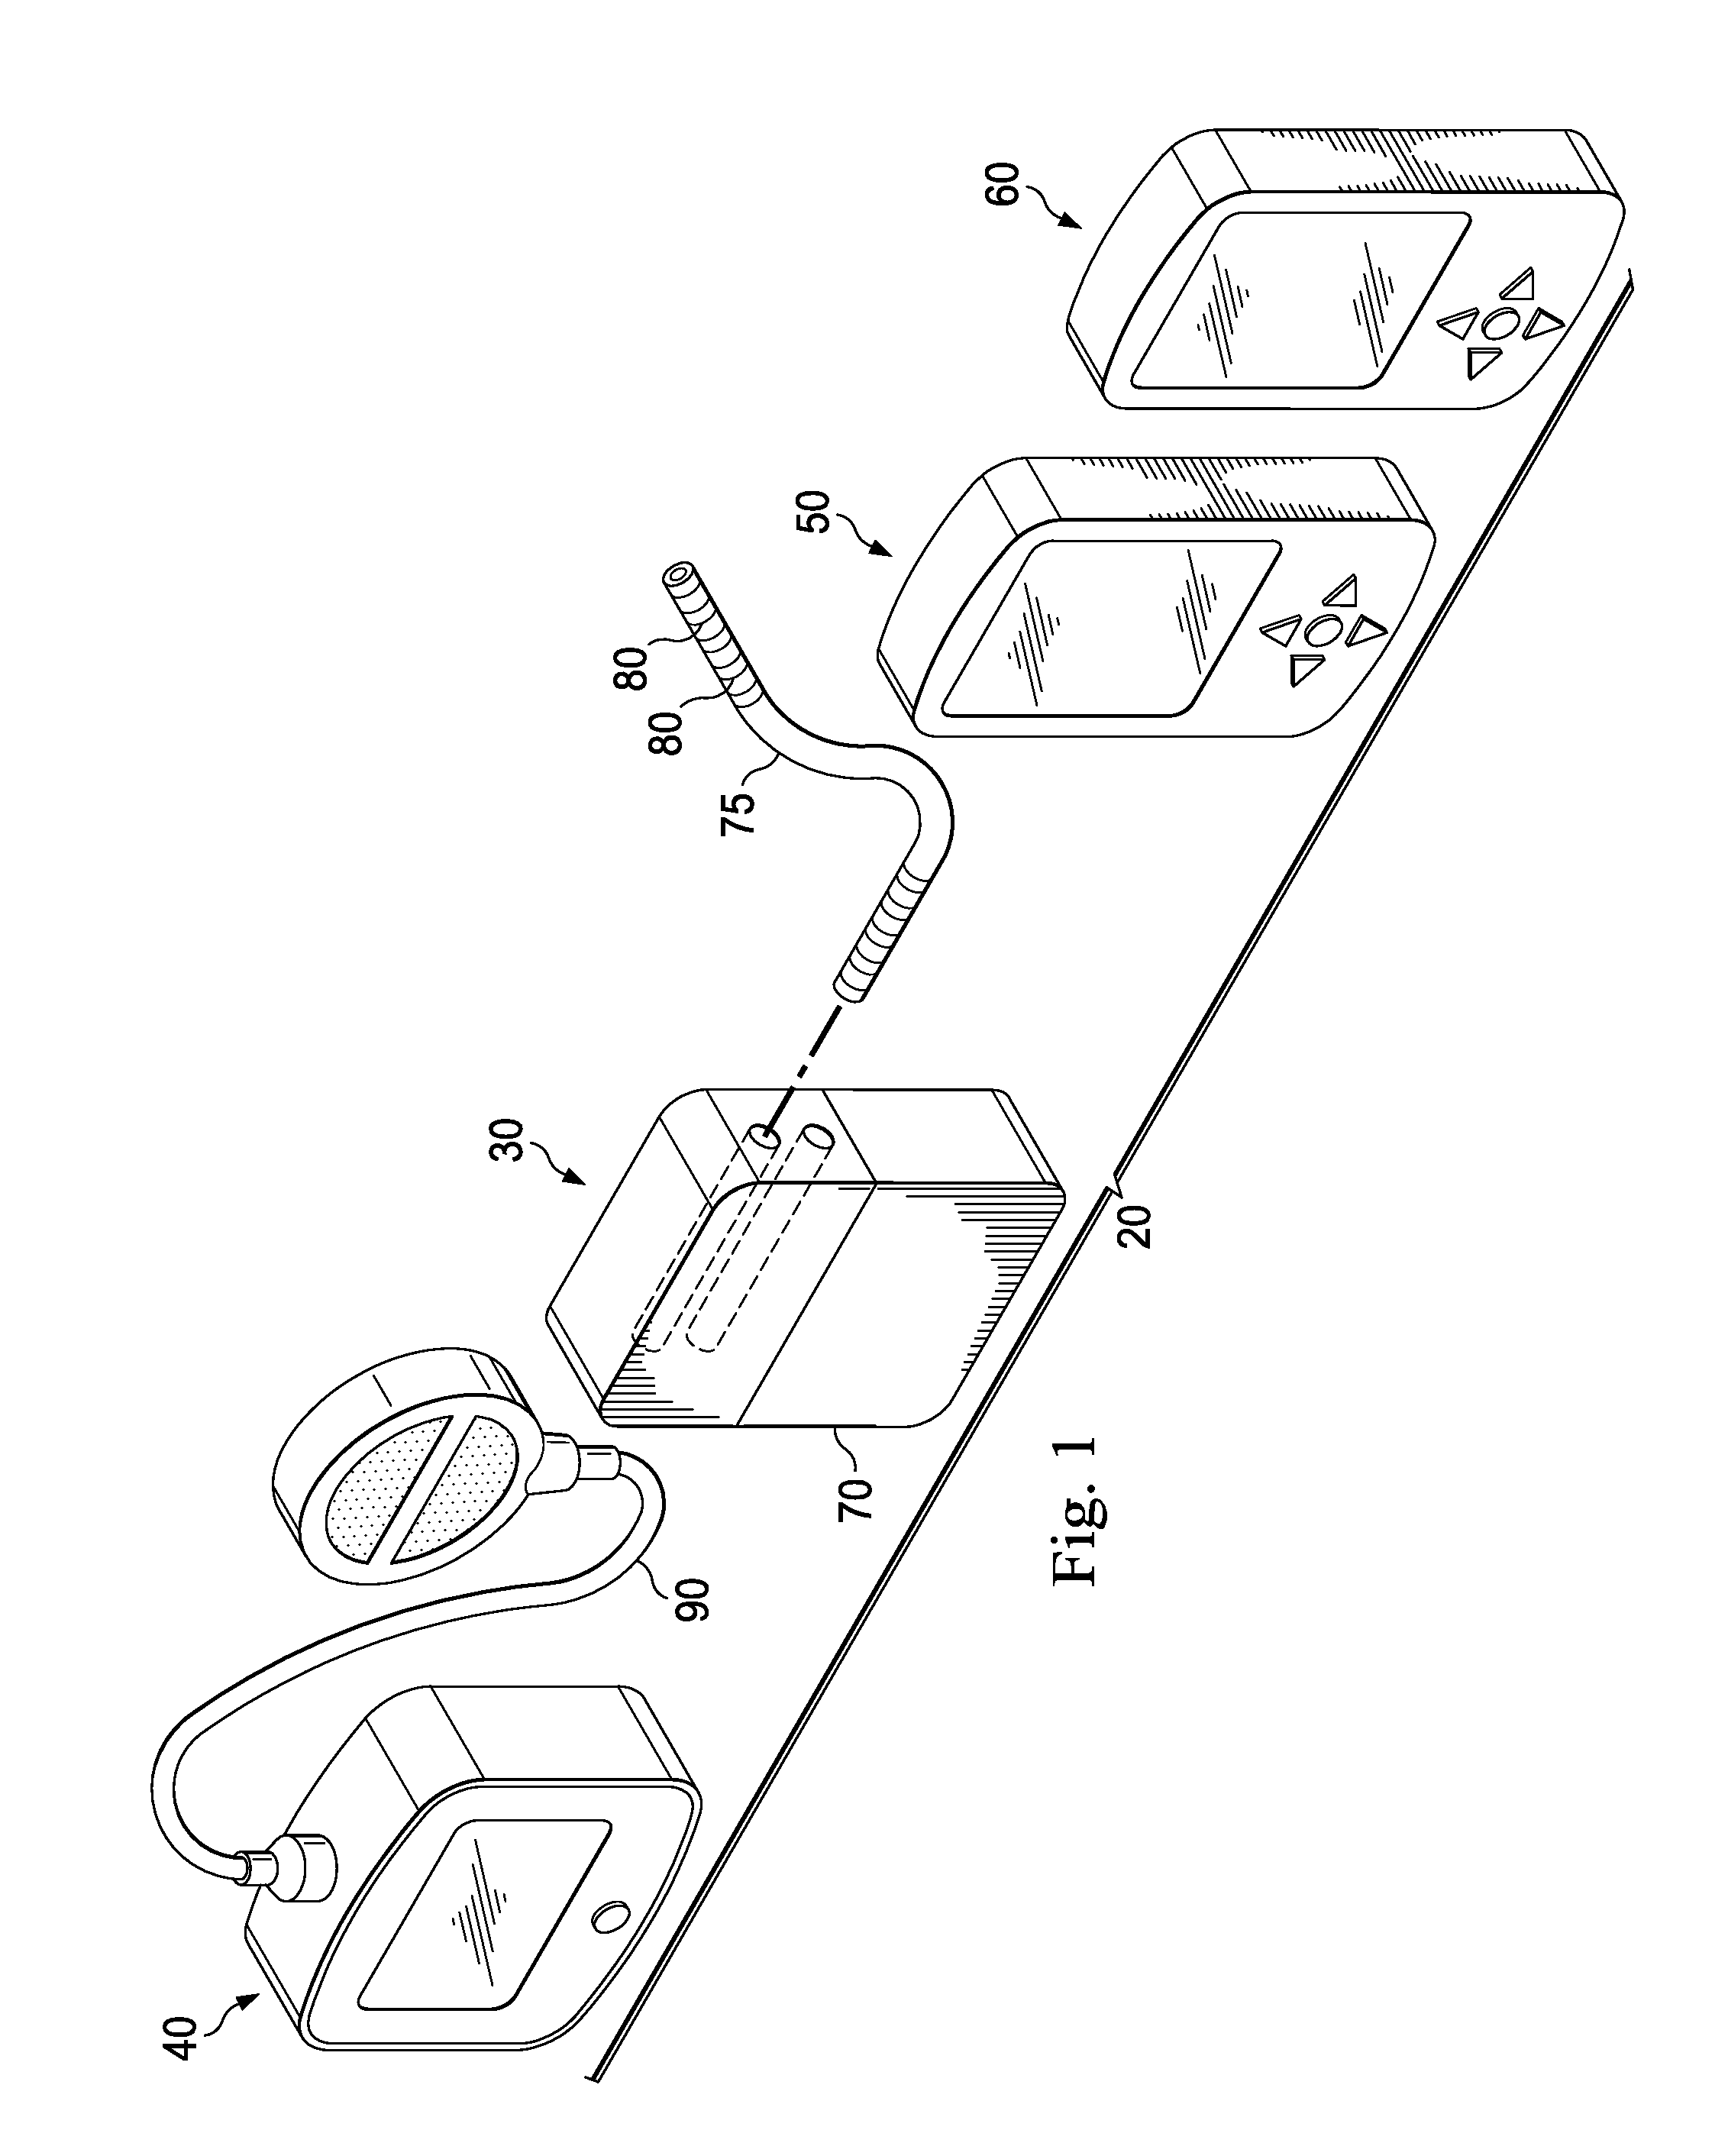 System and Method of Compressing Medical Maps for Pulse Generator or Database Storage